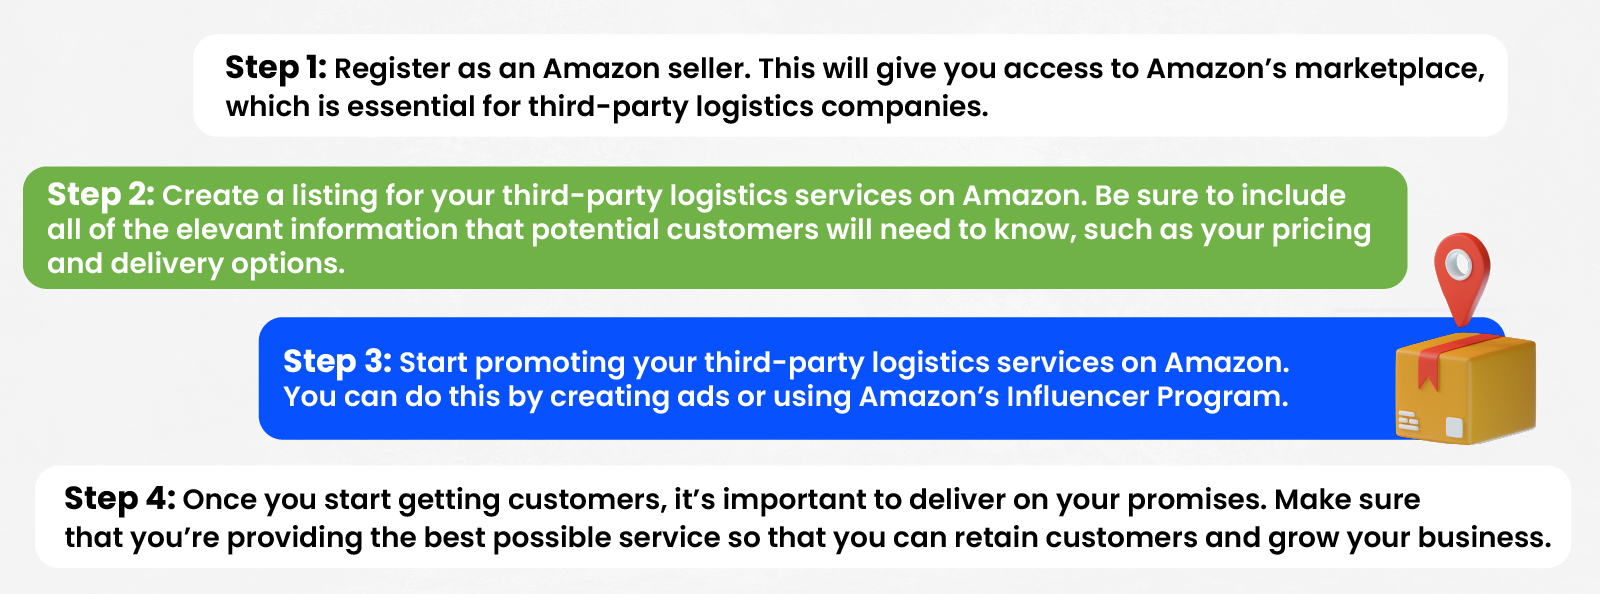 3pl For Amazon Sellers